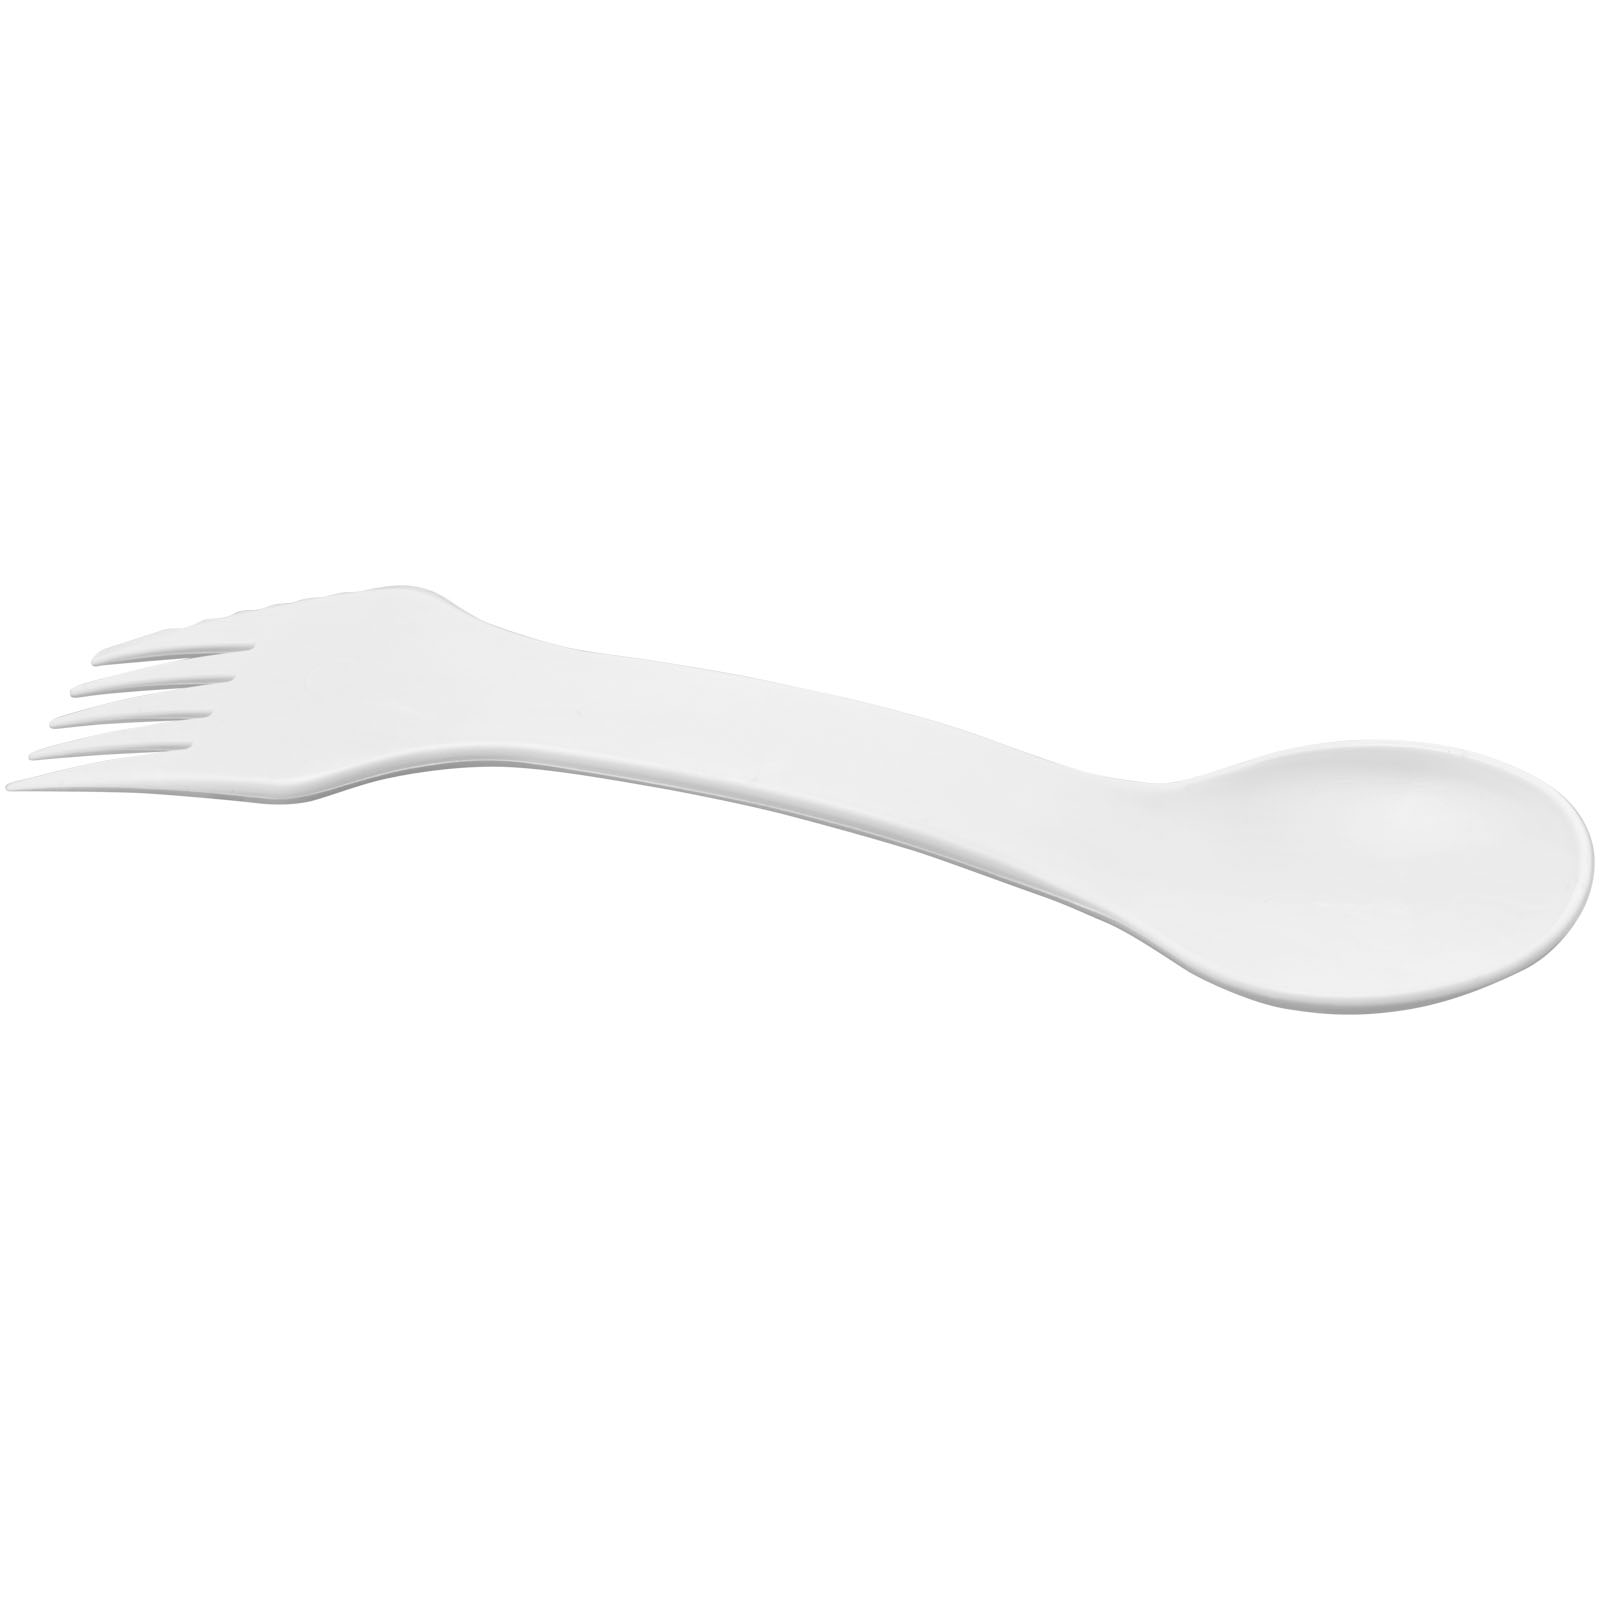 Combined Fork and Spoon with Antimicrobial Technology - Great Ayton